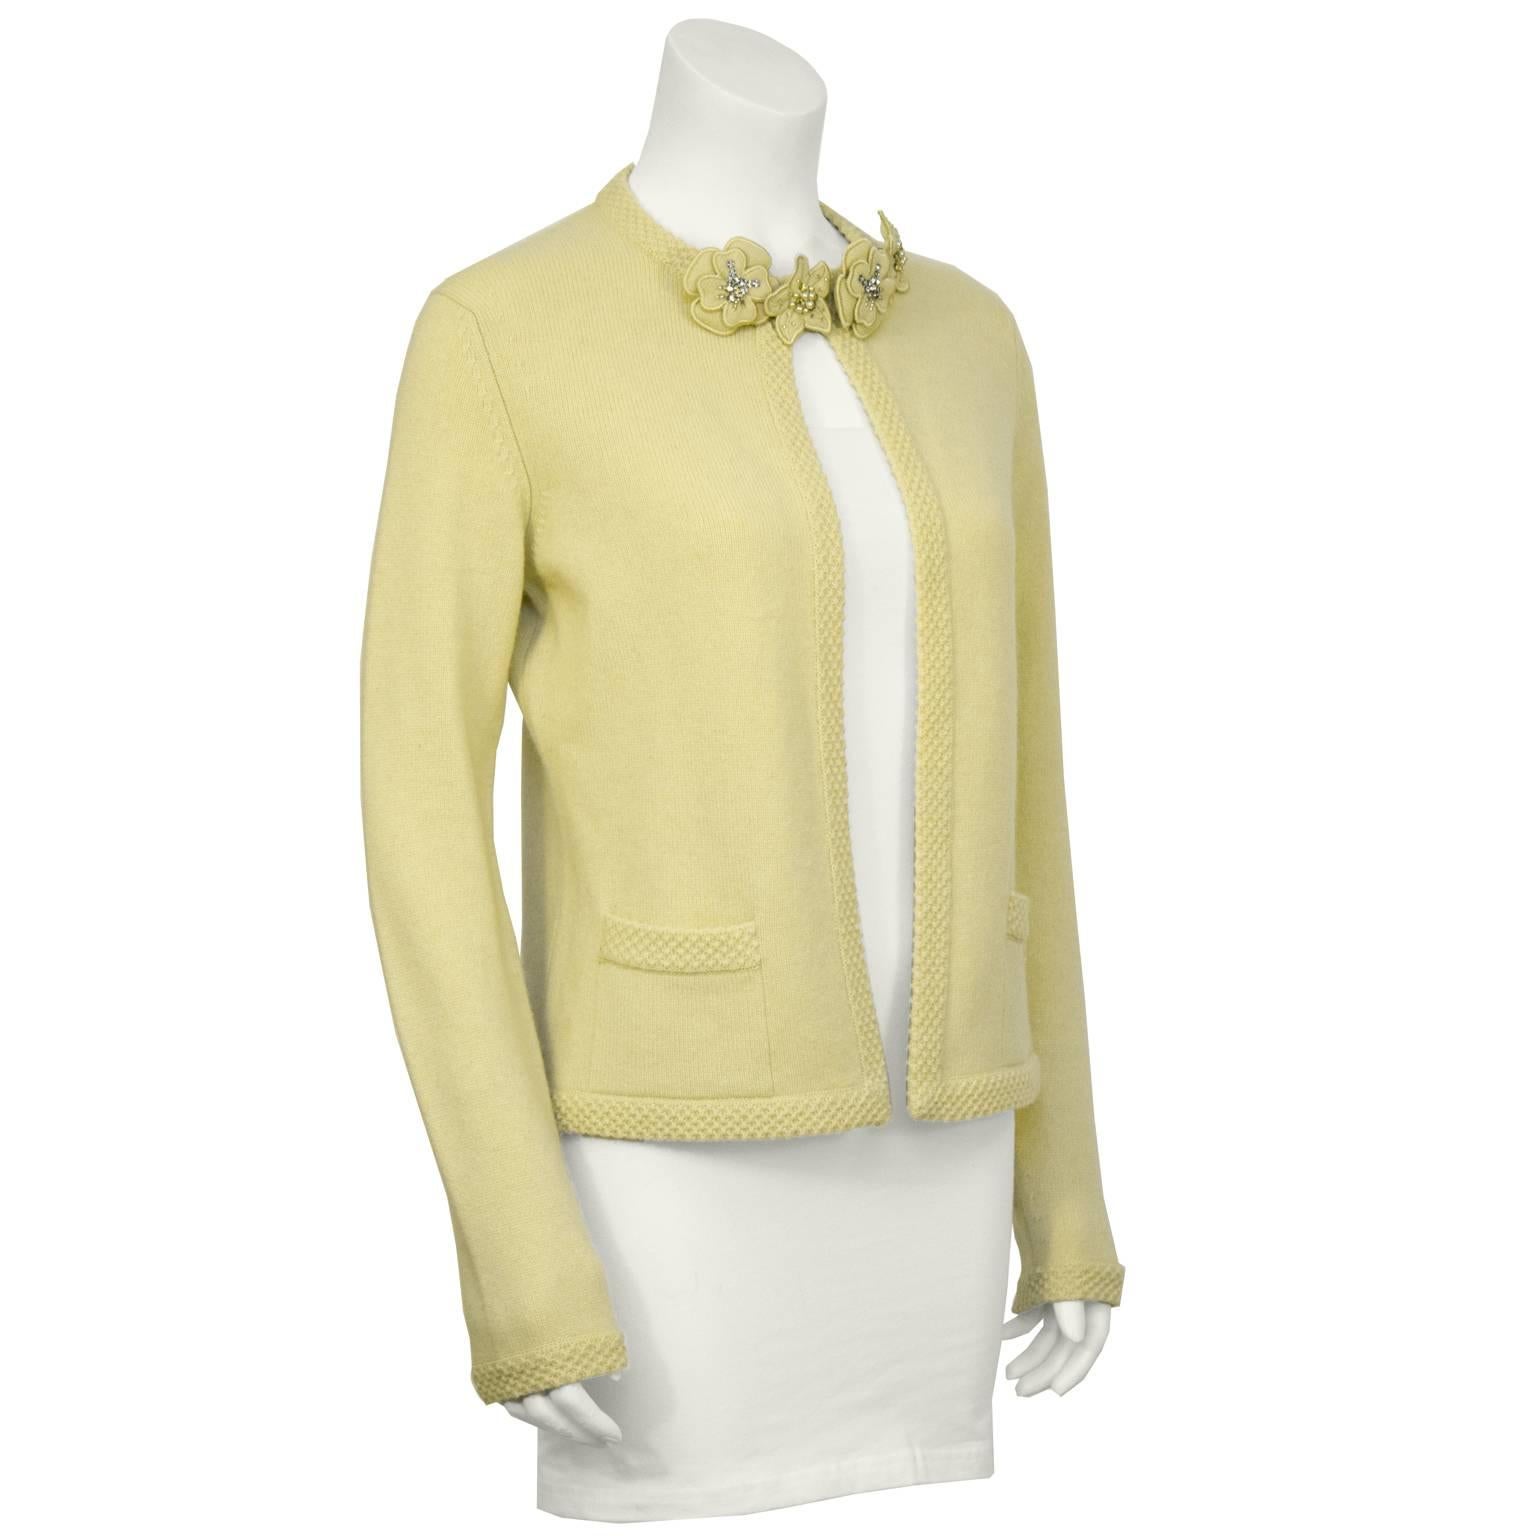 Spring 2005 Chanel butter yellow cashmere cardigan. The cardigan has a hook closure at the neck, two front patch pockets, and a cashmere honeycomb trim. The neckline is adorned with four cashmere flower pins with rhinestones and pearls that are